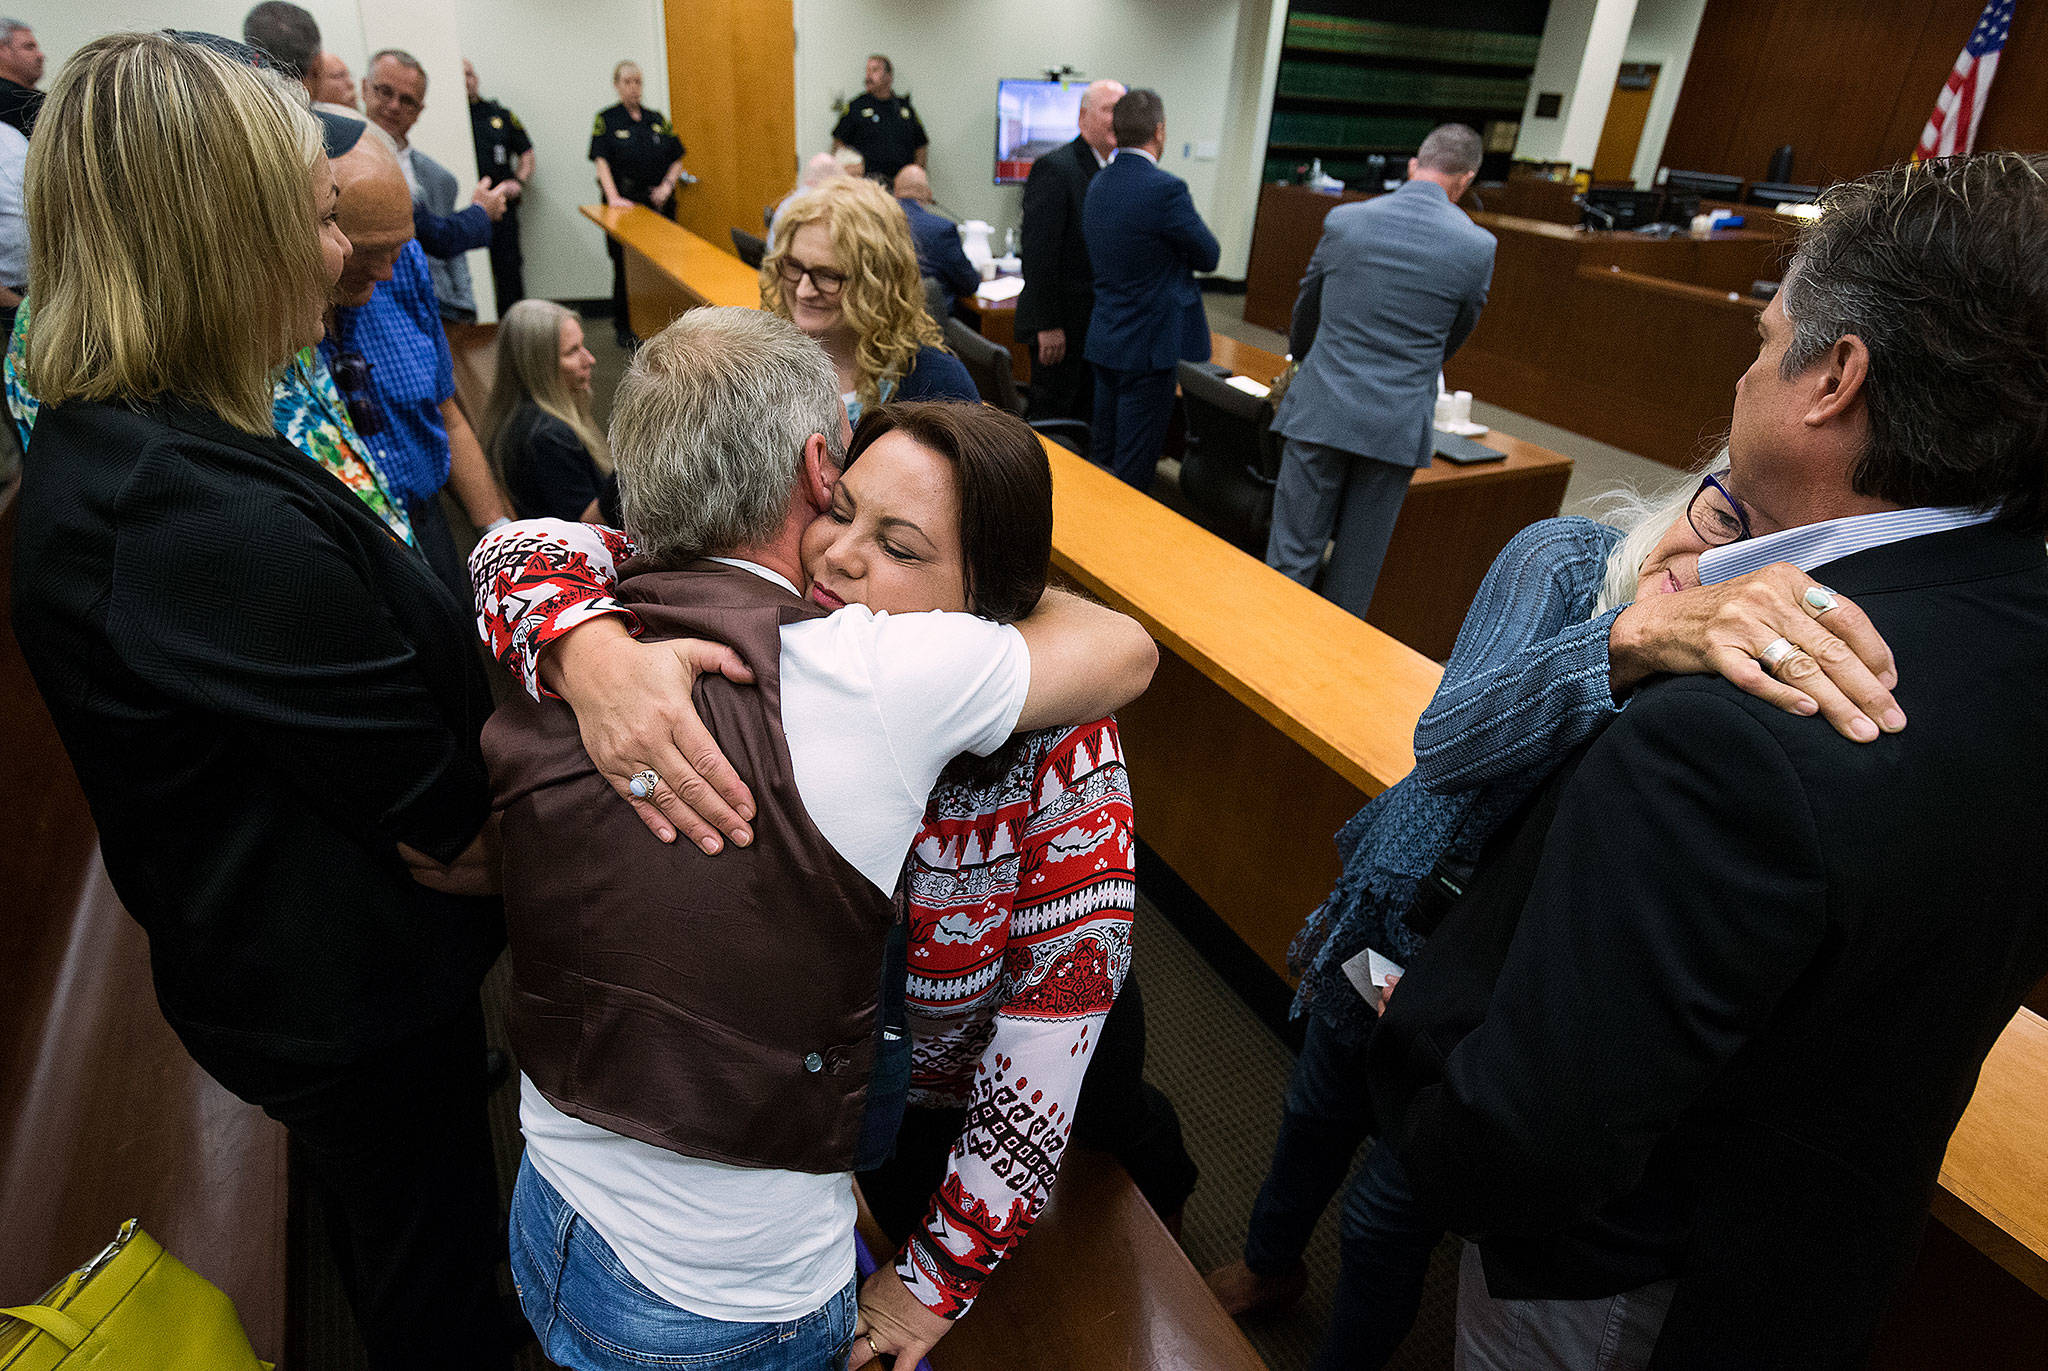 Jay Cook’s sister Laura Baanstra (center) hugs Doran Schiller, a family friend, while Jay’s mother, Lee Cook, embraces Gary Baanstra (right) after William Talbott II is sentenced at the Snohomish County Courthouse on Wednesday in Everett. (Andy Bronson / The Herald)